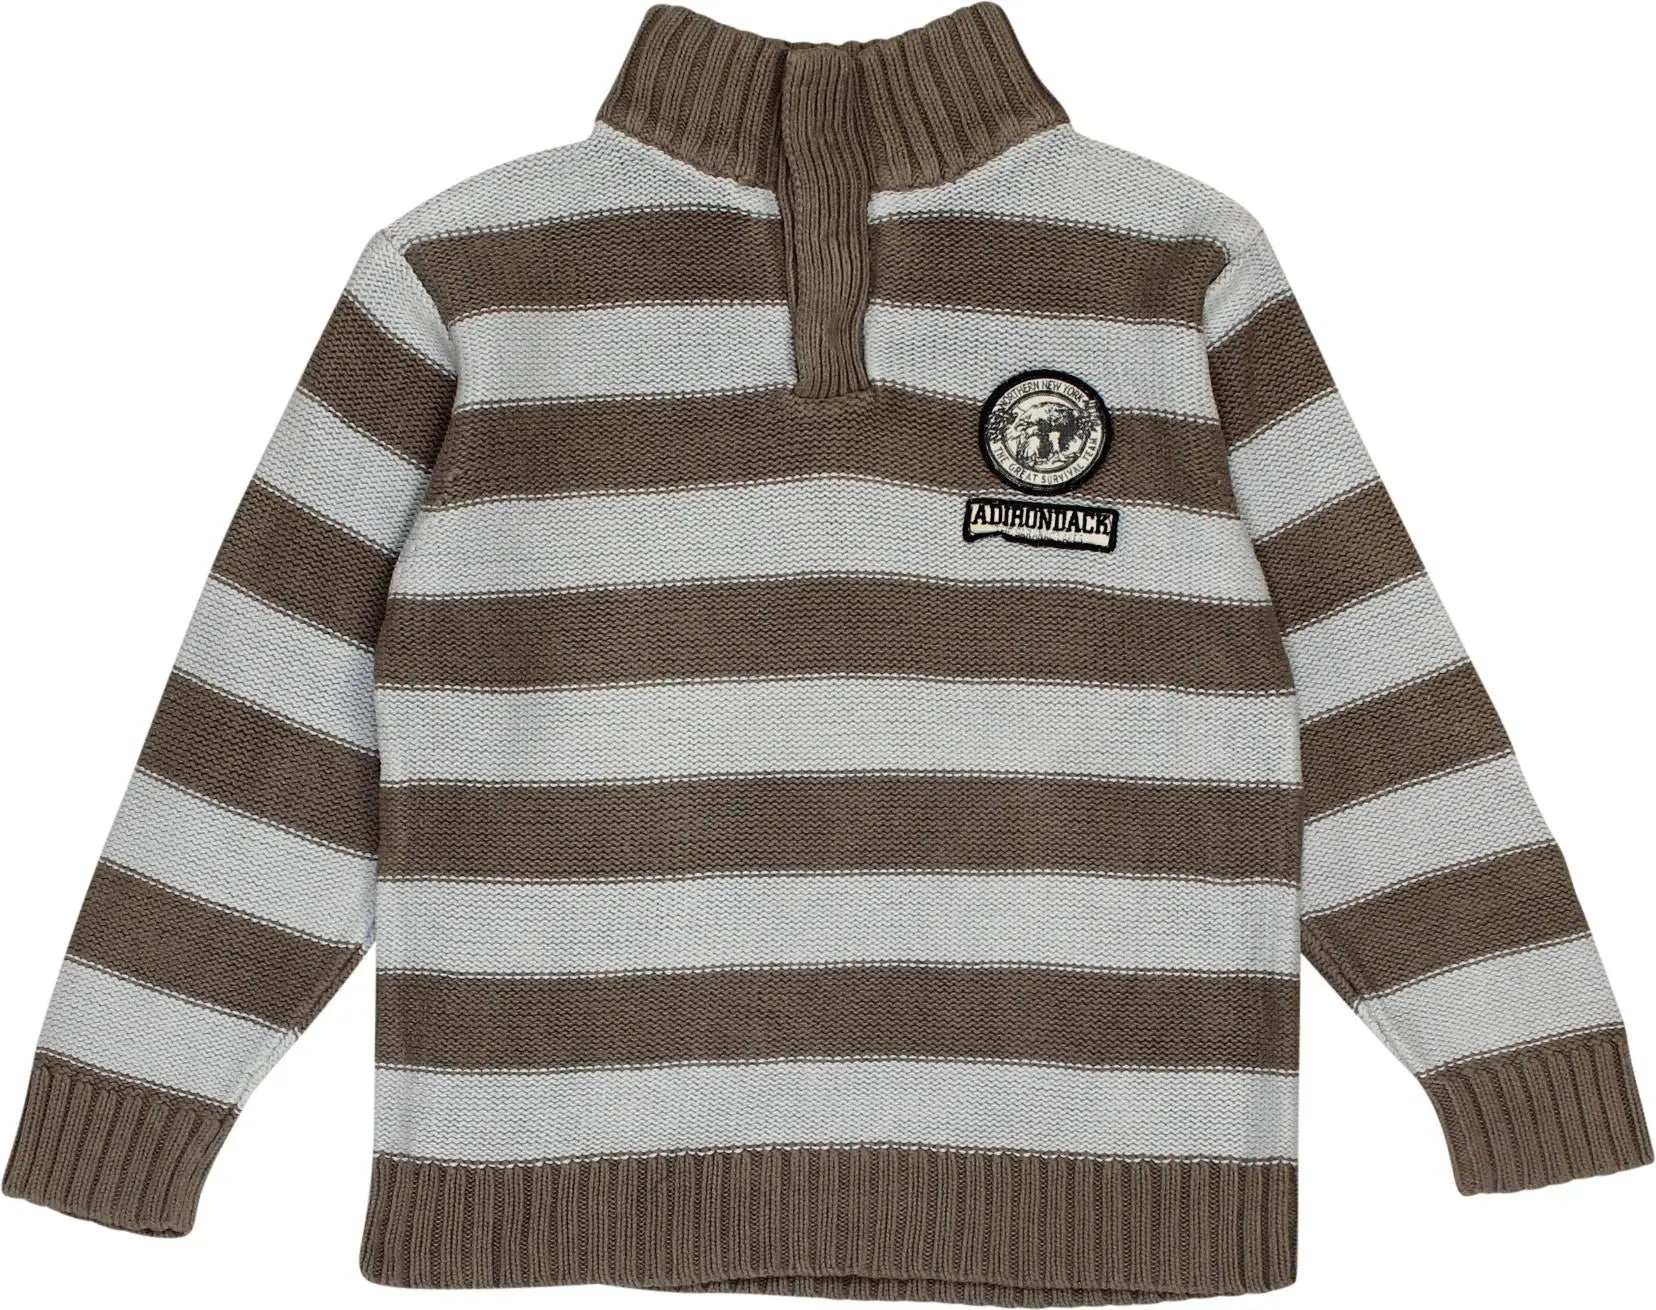 C&A - Striped Knitted Jumper- ThriftTale.com - Vintage and second handclothing